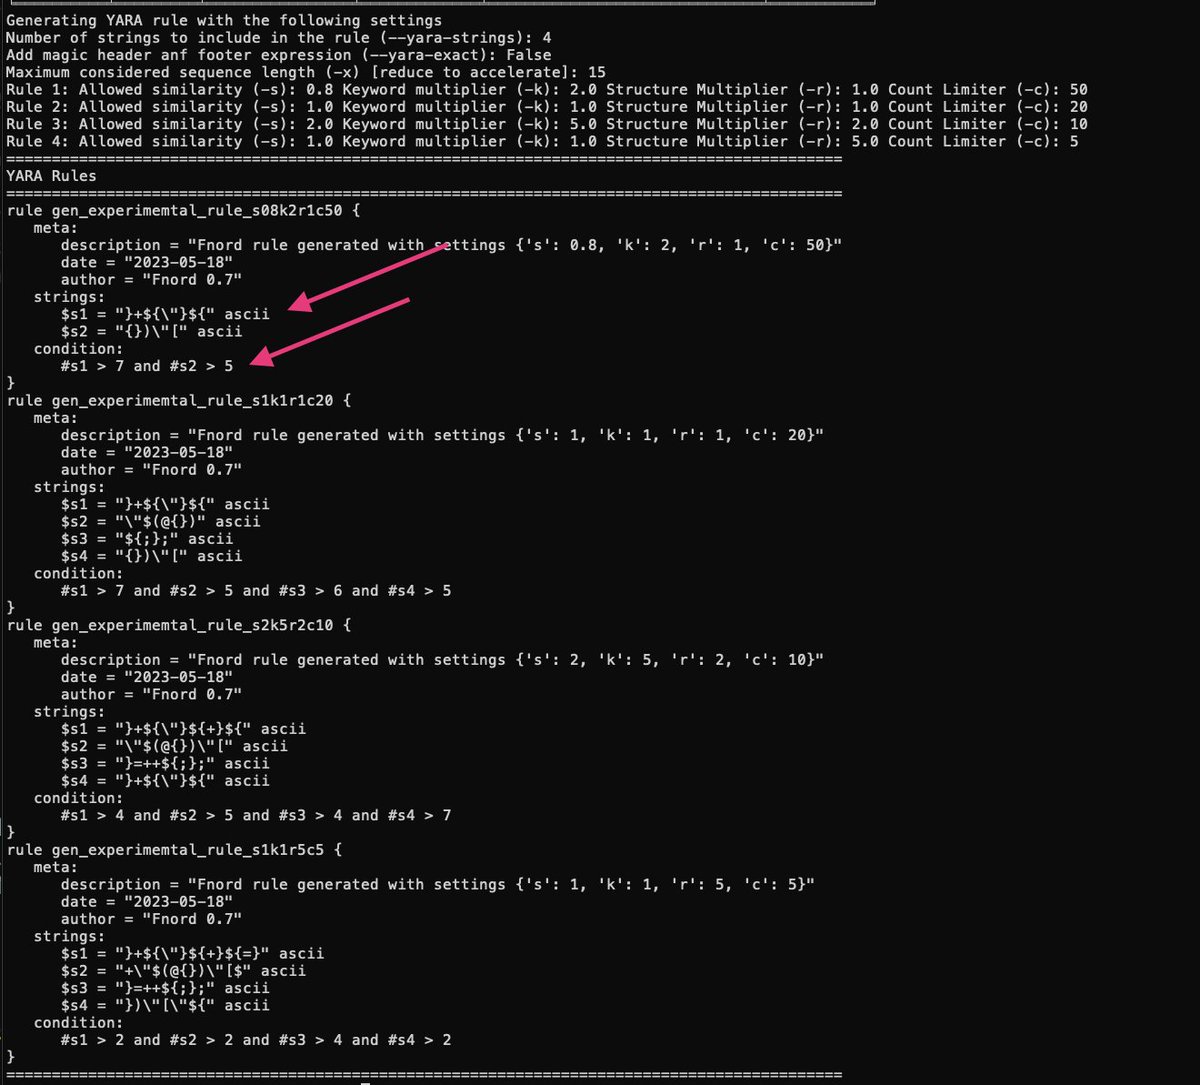 Remember that you can use my tool 'fnord' to extract recurring patterns from obfuscated code (including binary / non-ascii sequences)

It also auto-generates some #YARA rules that you can review and test

github.com/Neo23x0/Fnord